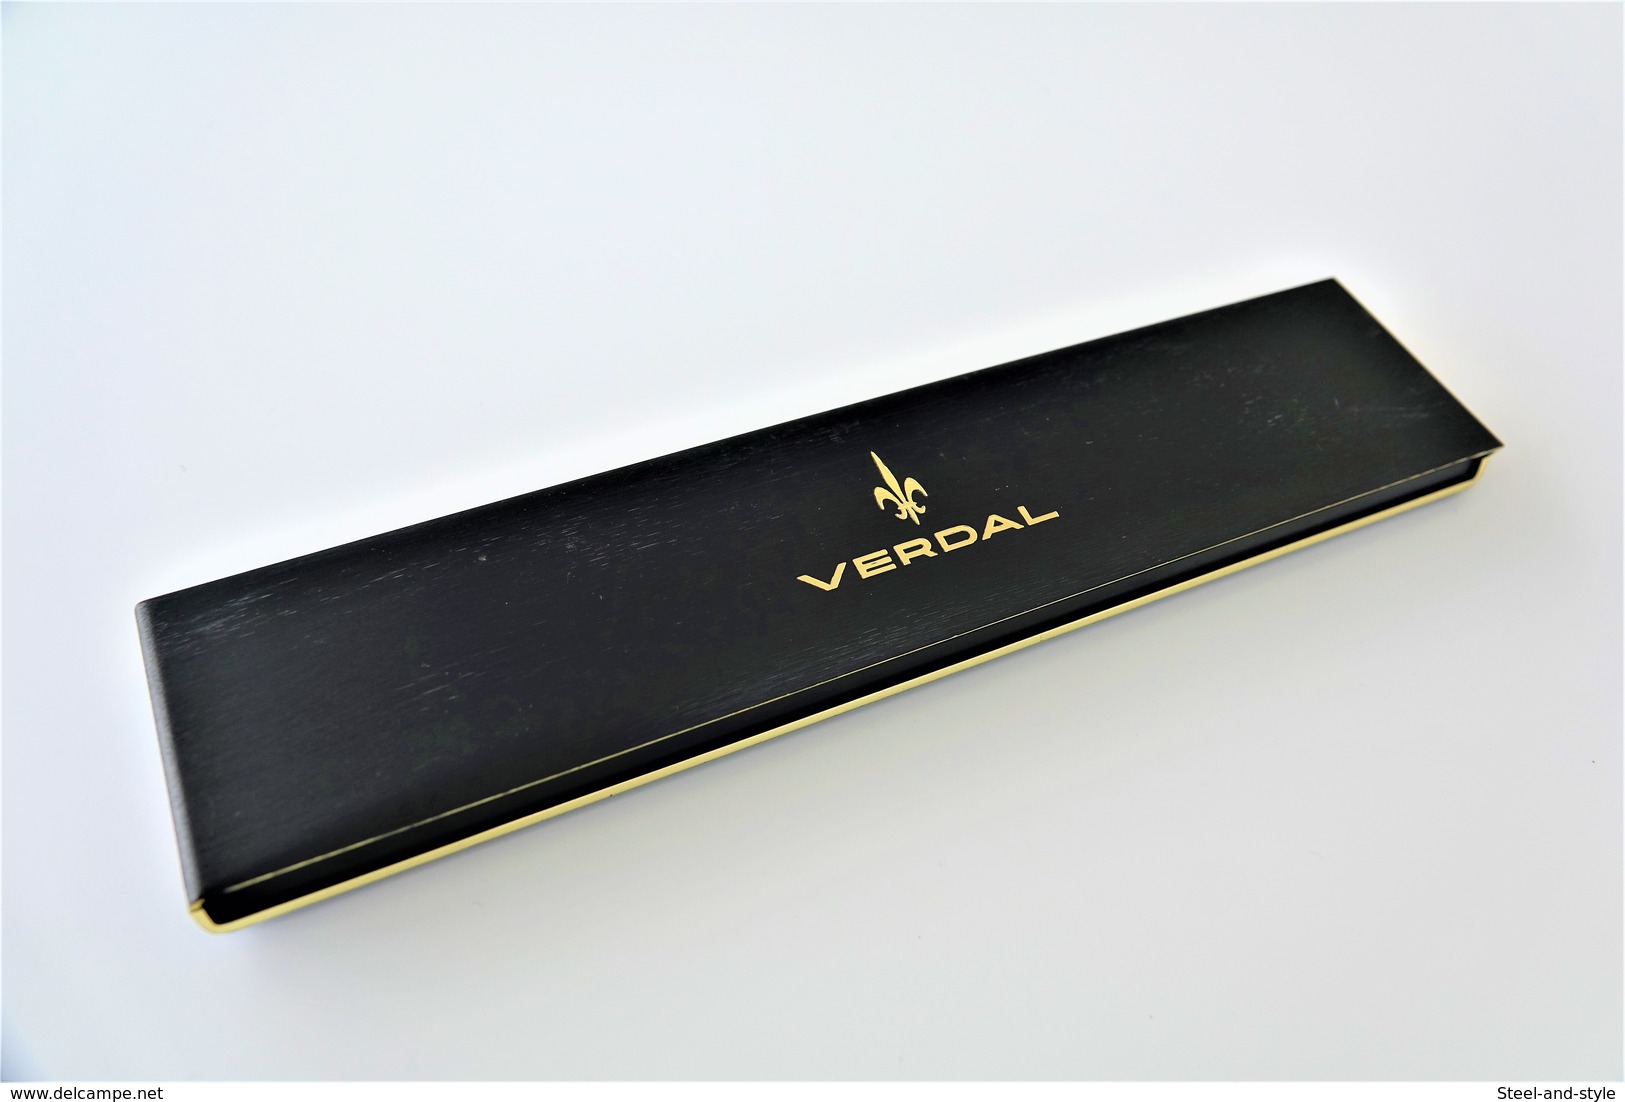 Watches : VERDAL TIME-DATE AUTOMATIC RaRe With Original Box - 20 Microns Gold Plated - Original - Running - 1970s - Designeruhren